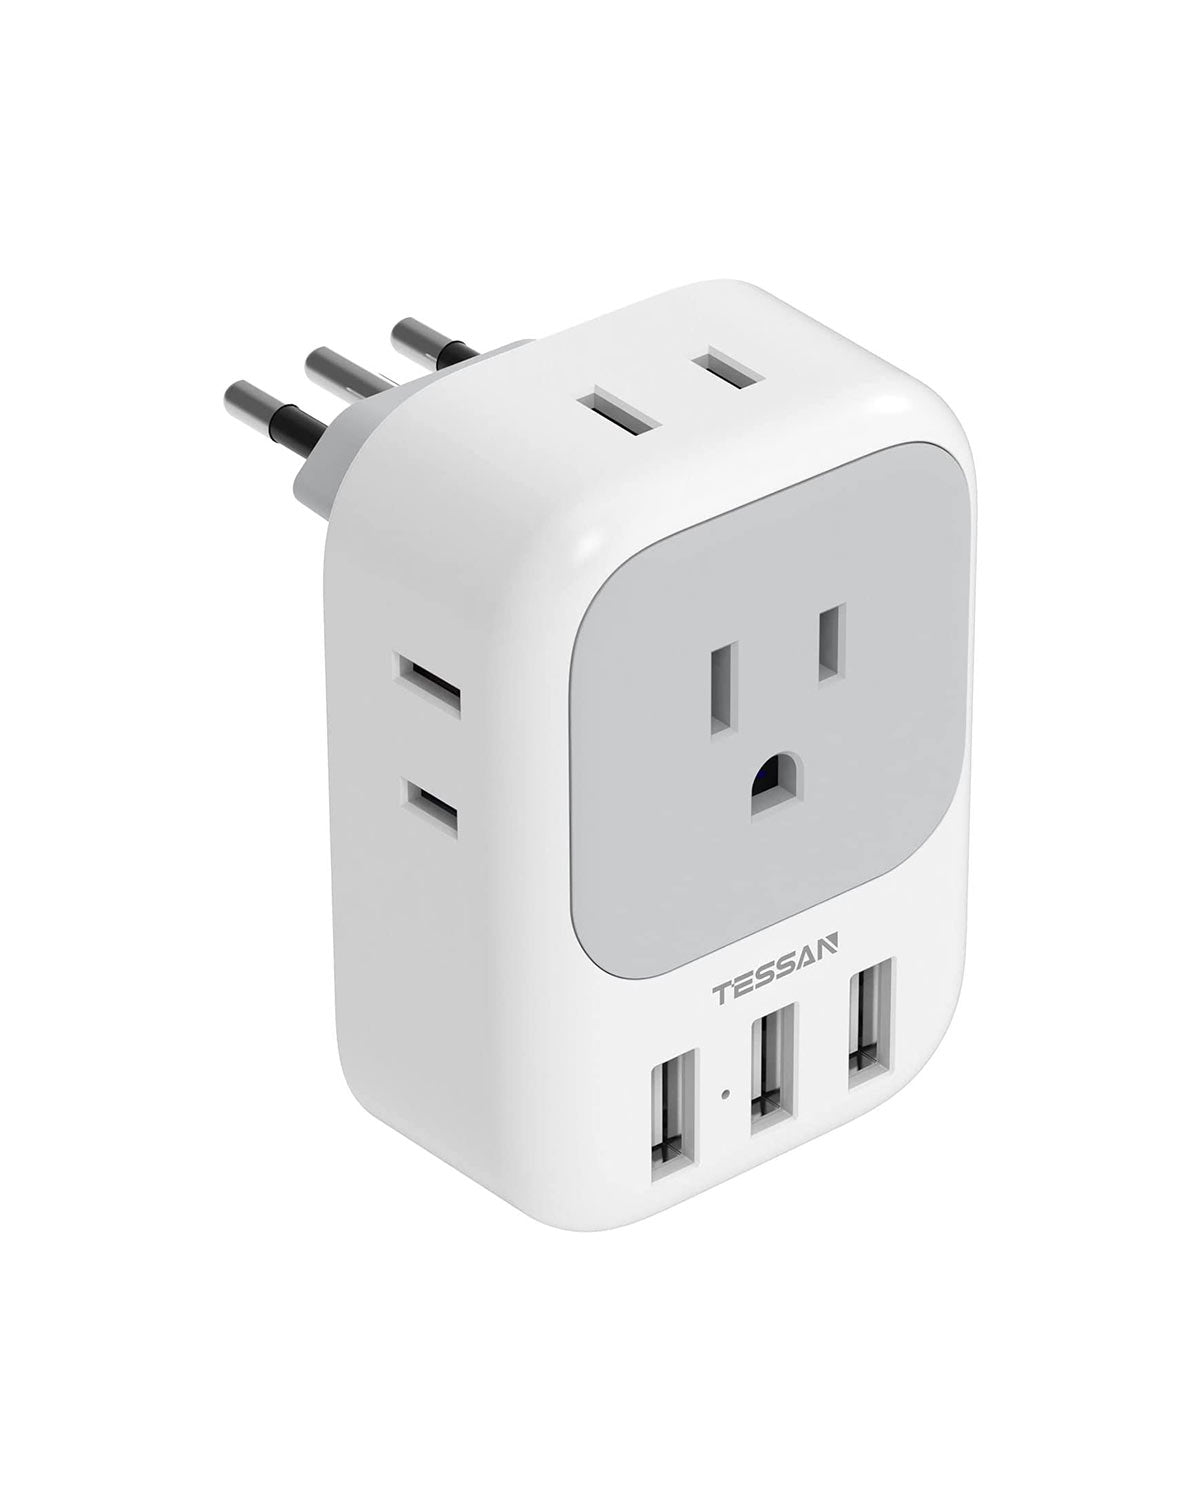 TESSAN US to Italian Power Adapter with 4 Outlets and 3 USB Ports